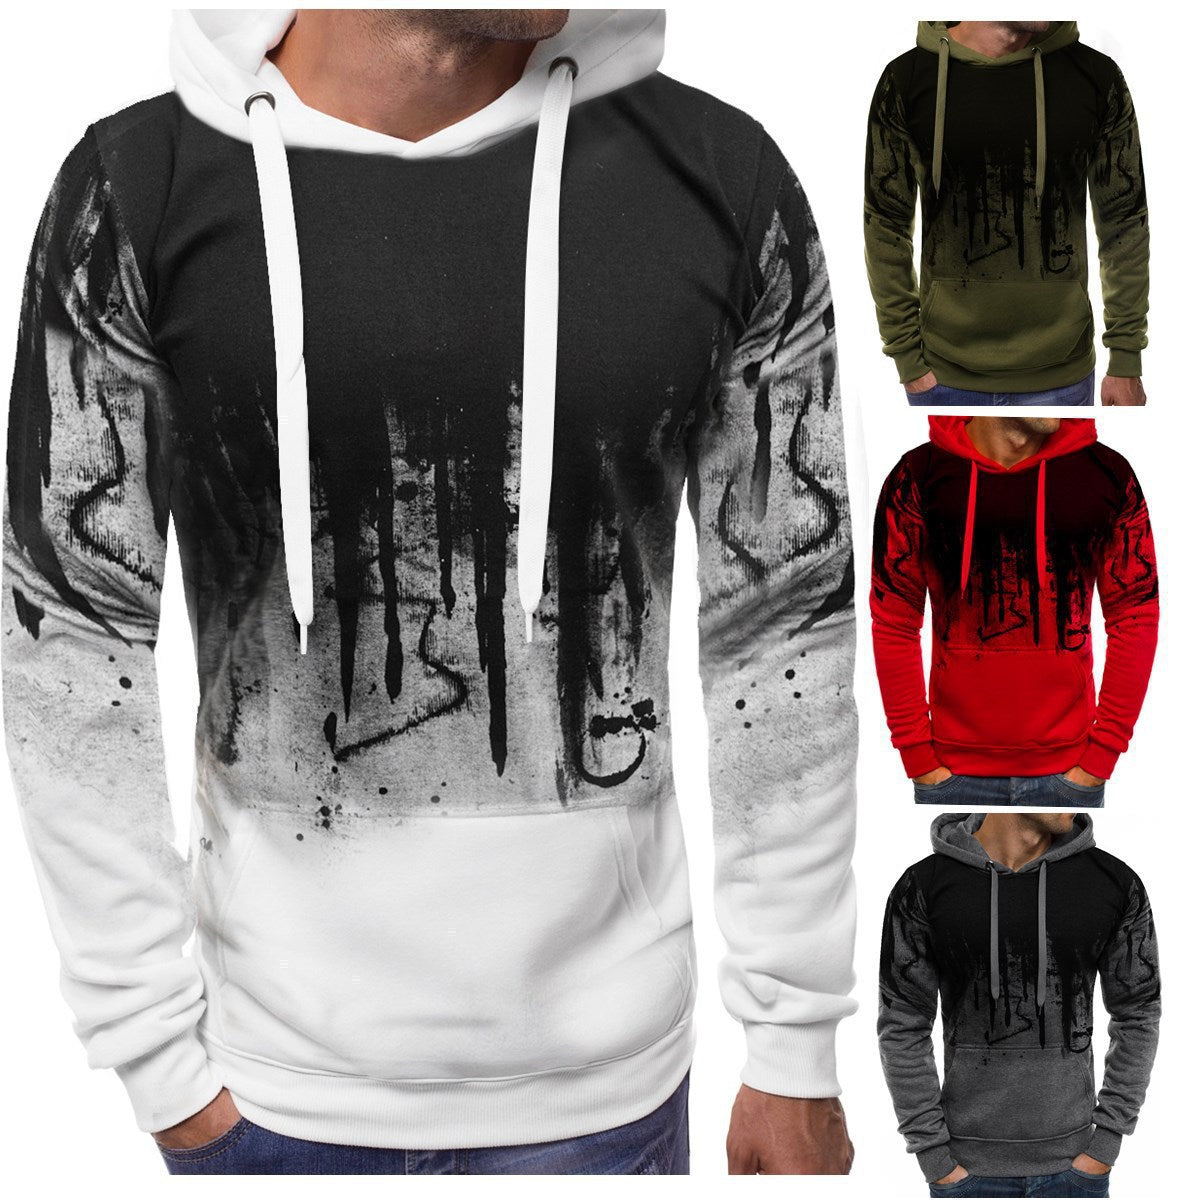 Mens casual sports tethered hooded fleece sweater jacket